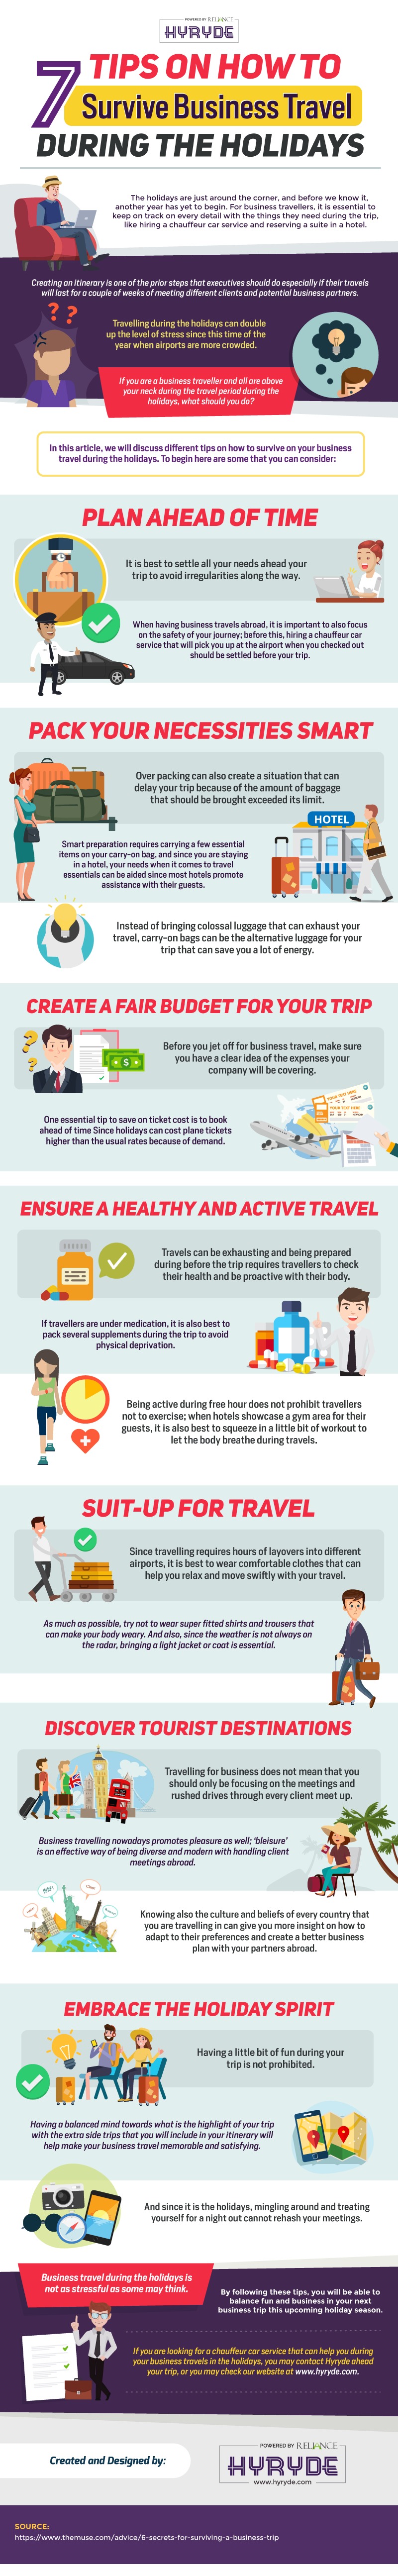  7 Tips on How to Survive Business Travel During the Holidays [Infographic]